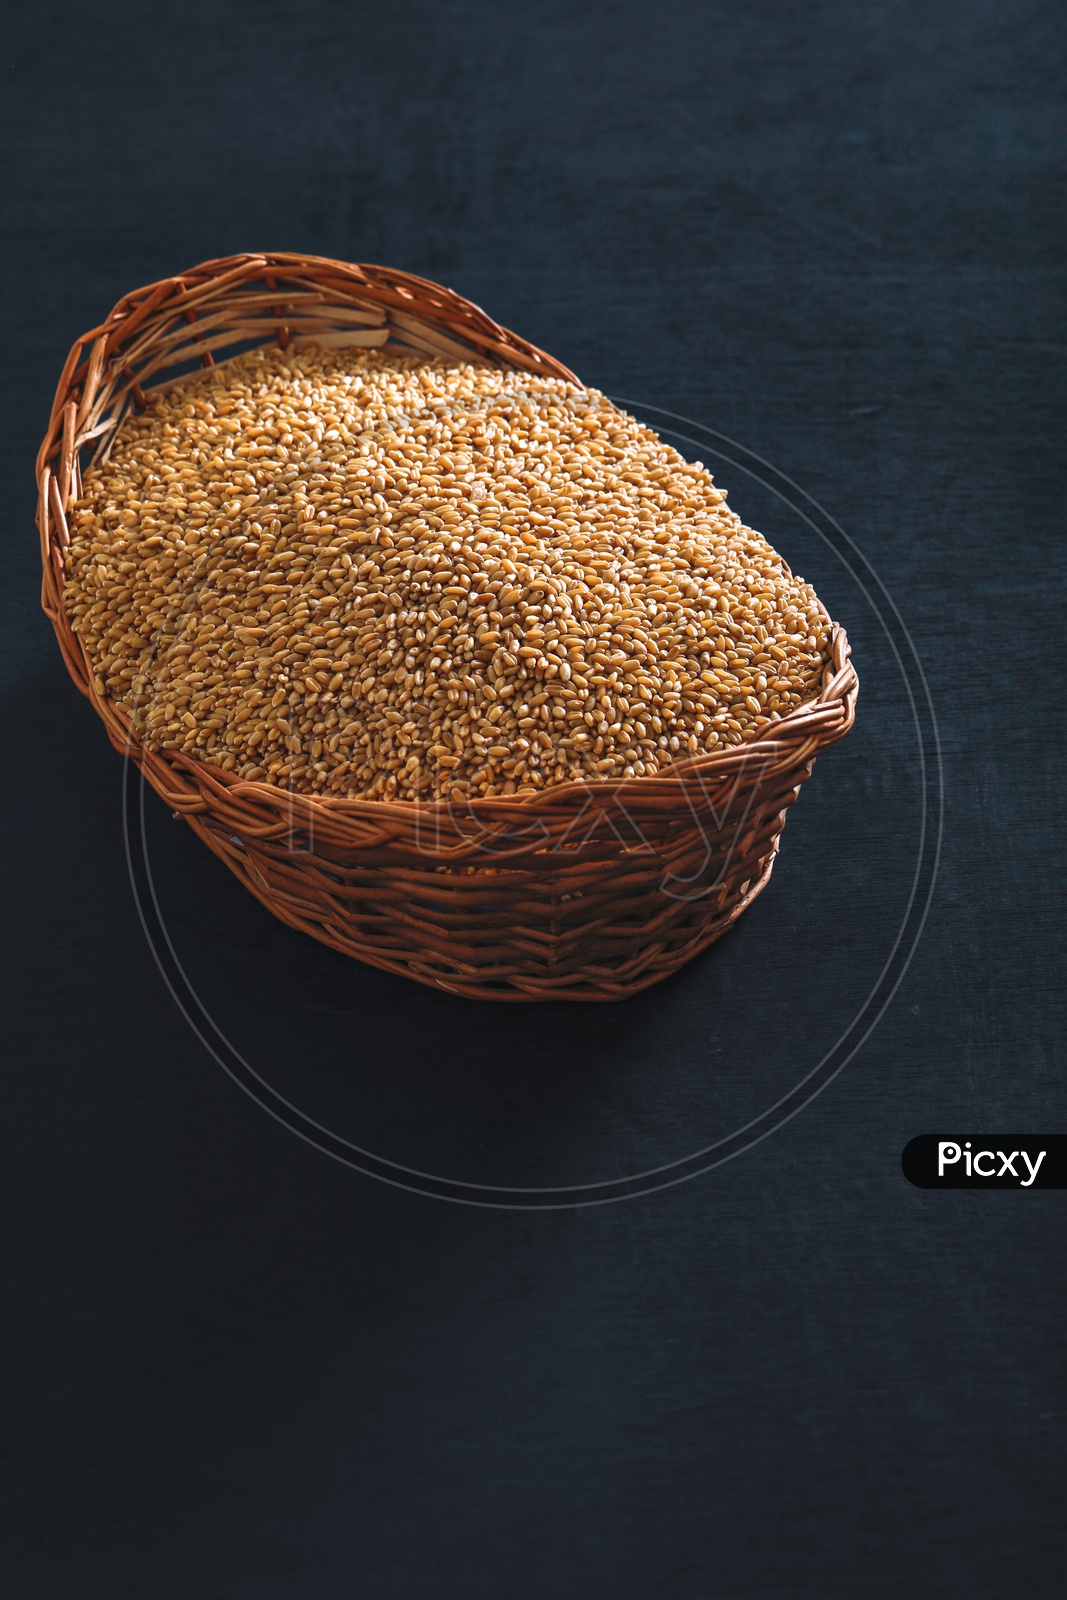 Wheat Grains In an Wooden Weaved Basket On an Isolated Background